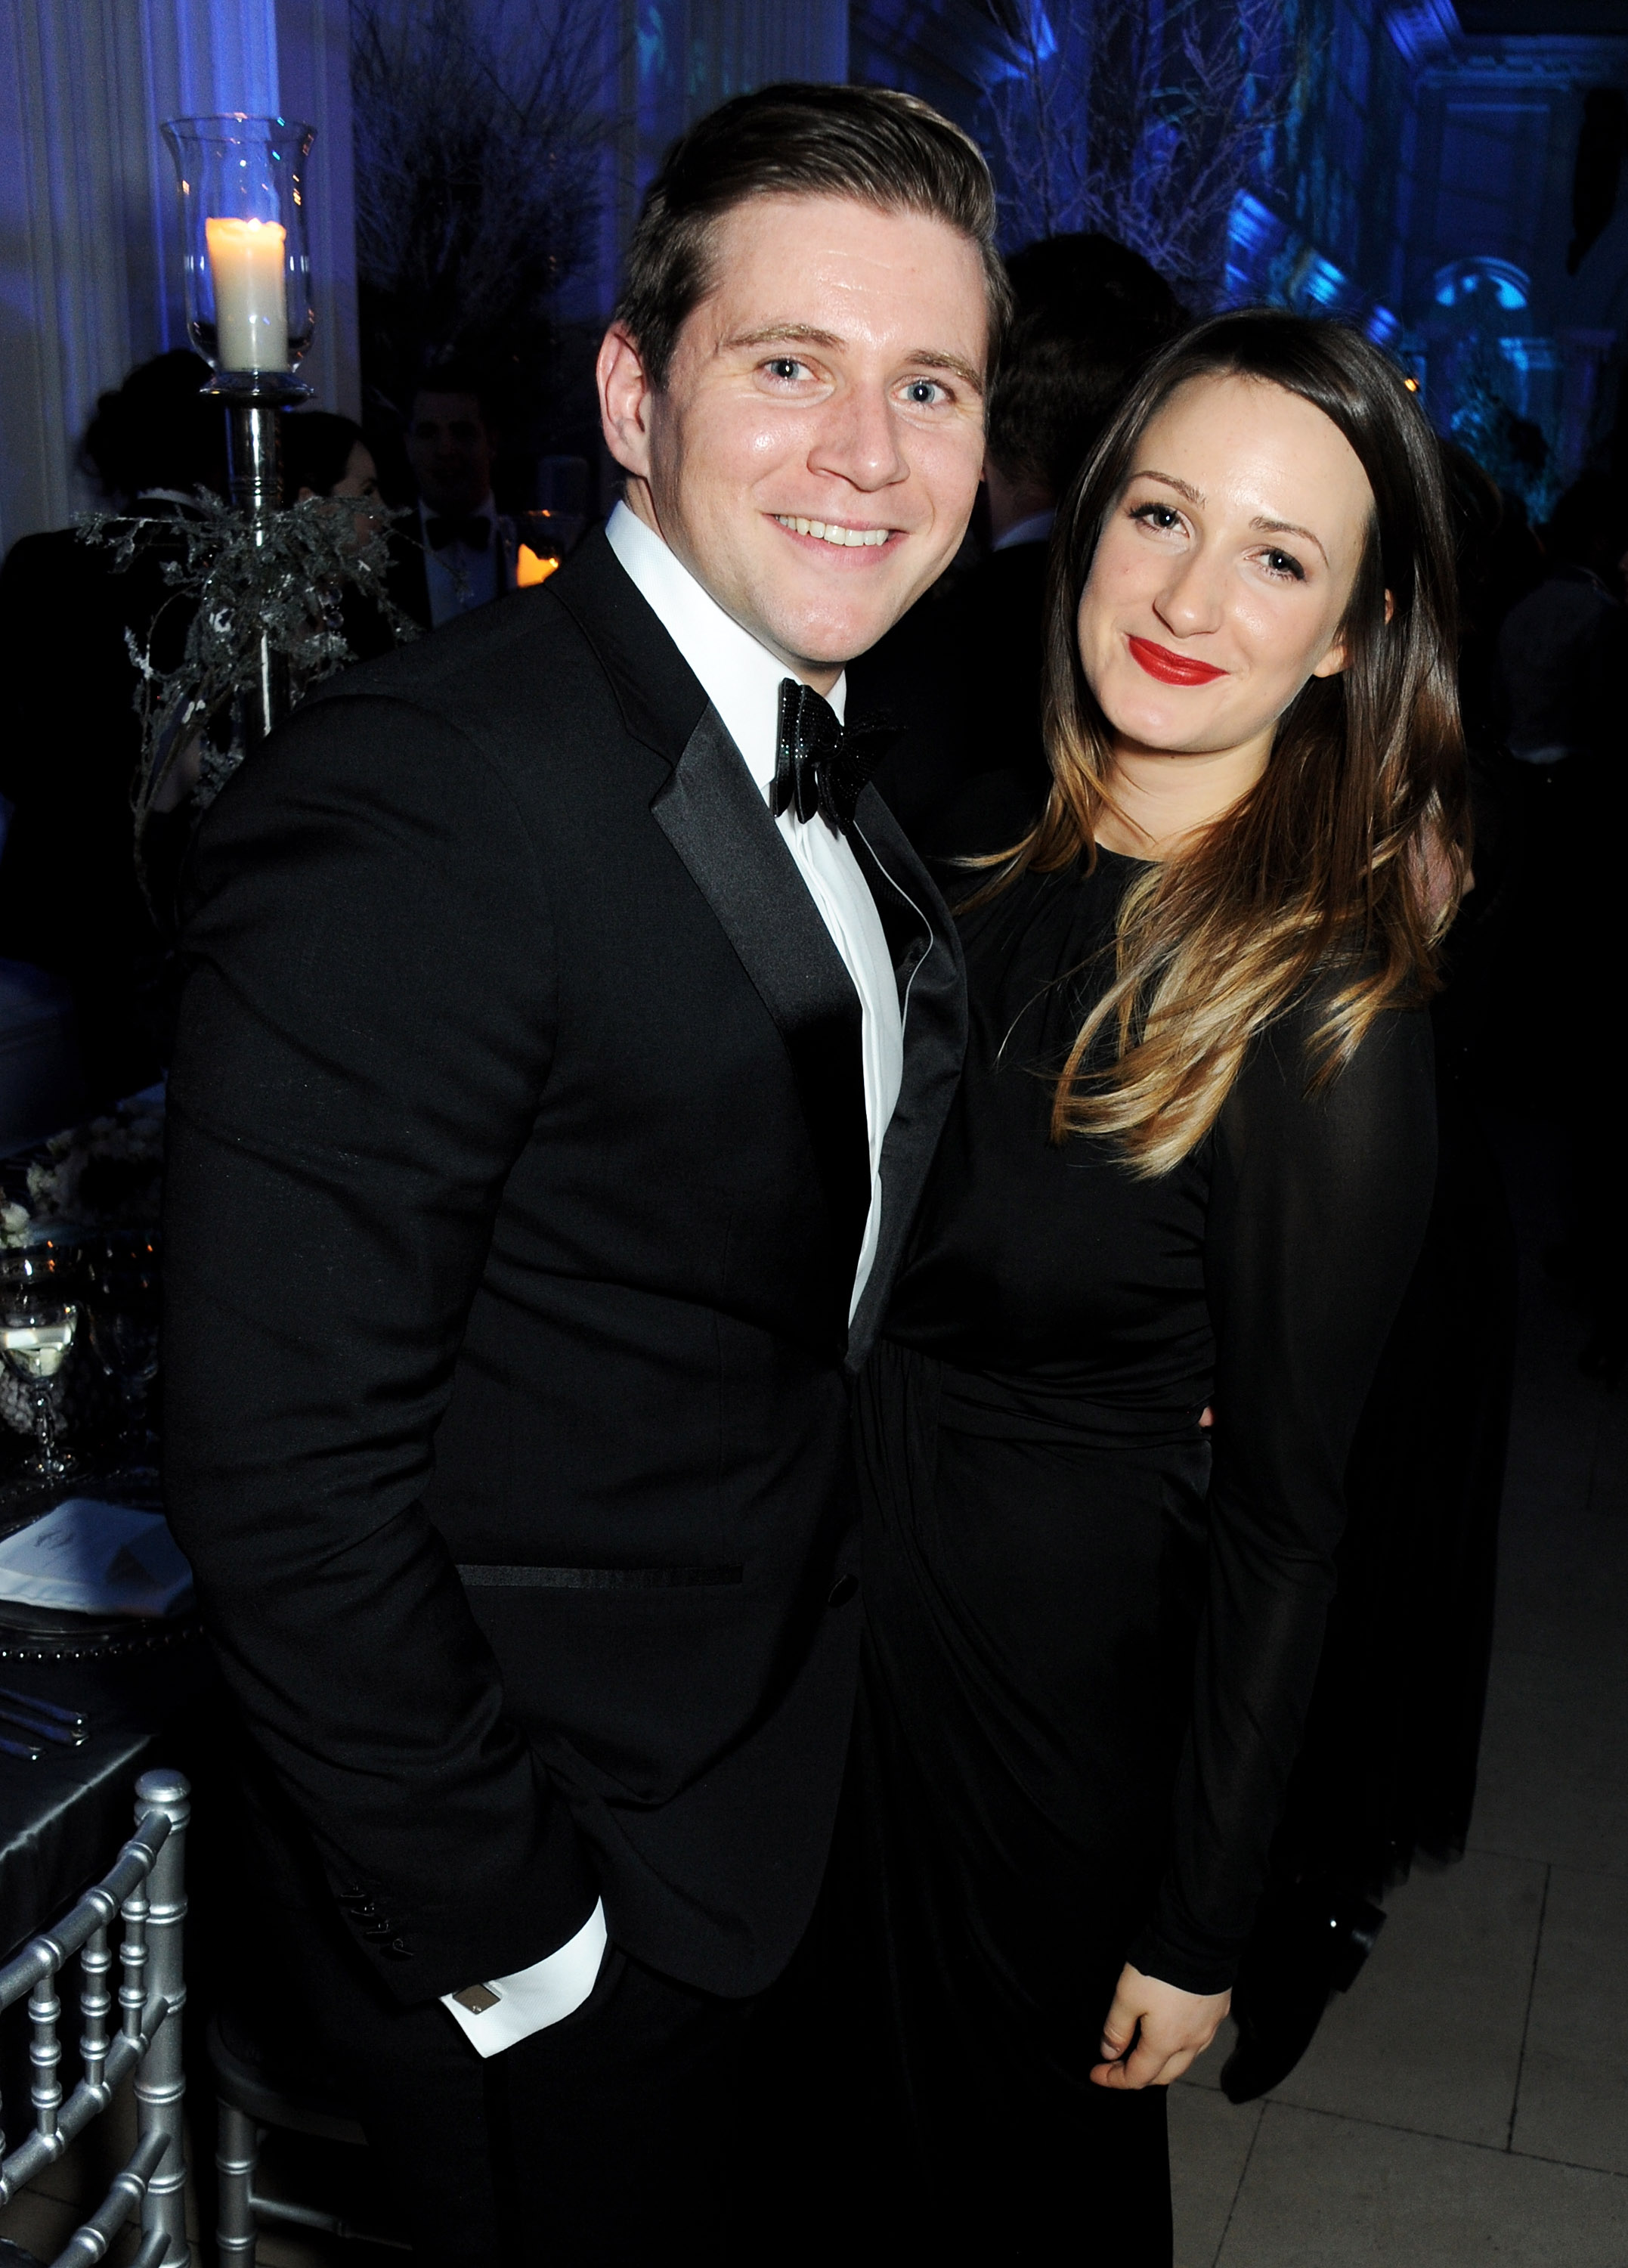 Allen Leech and Doone Forsyth attend the Winter Whites Gala in aid of Centrepoint at Kensington Palace on November 26, 2013, in London, England | Source: Getty Images